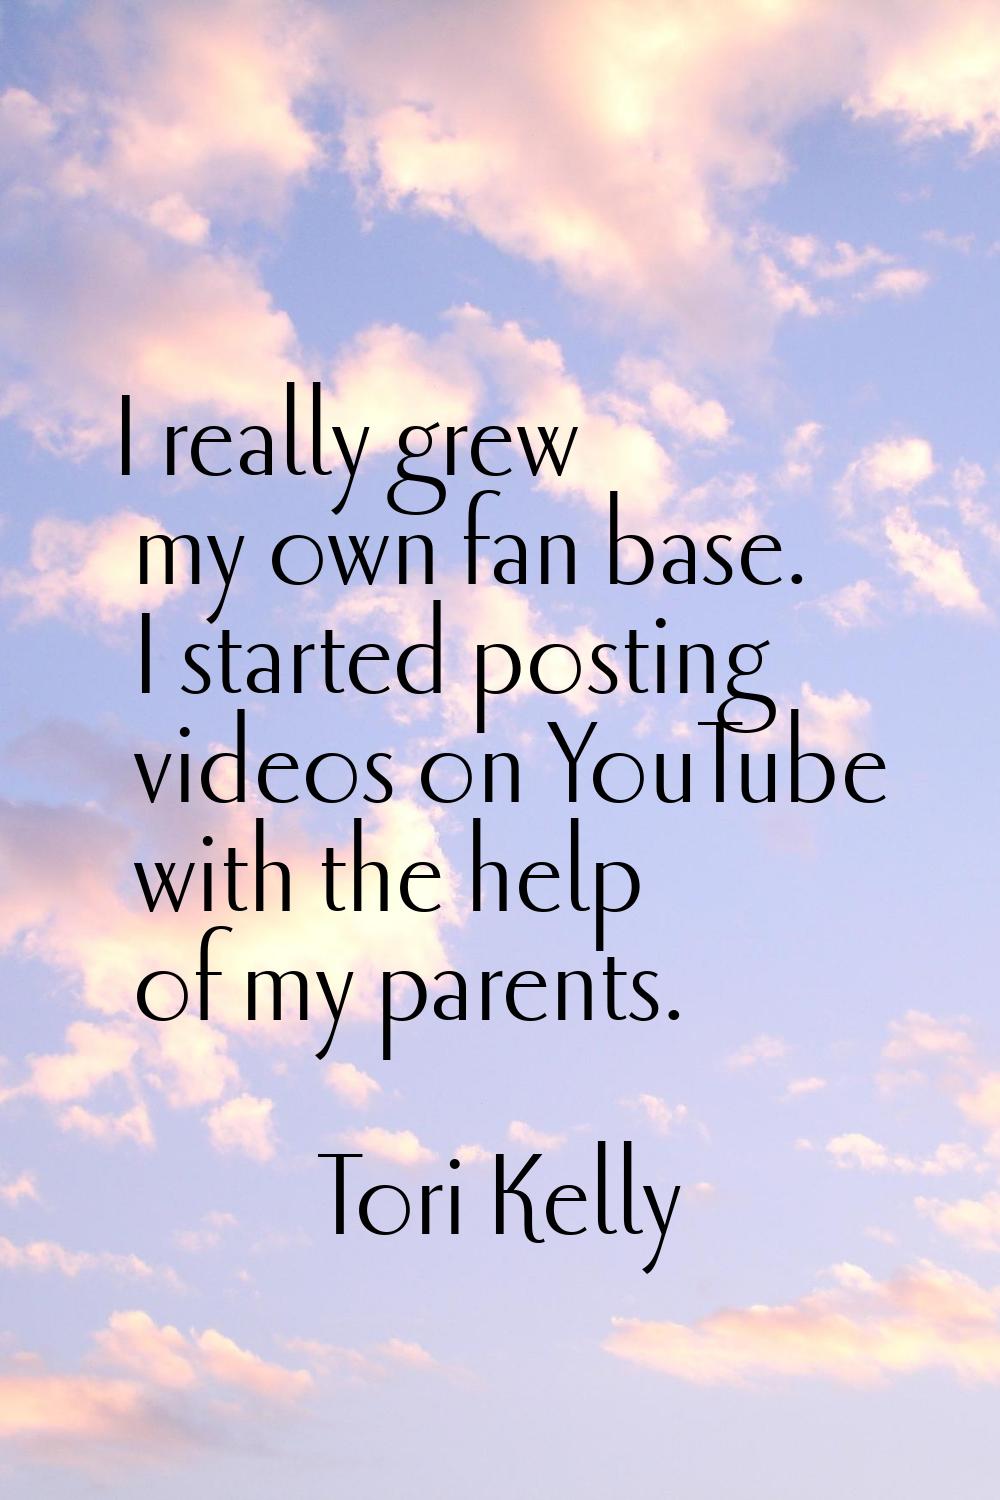 I really grew my own fan base. I started posting videos on YouTube with the help of my parents.